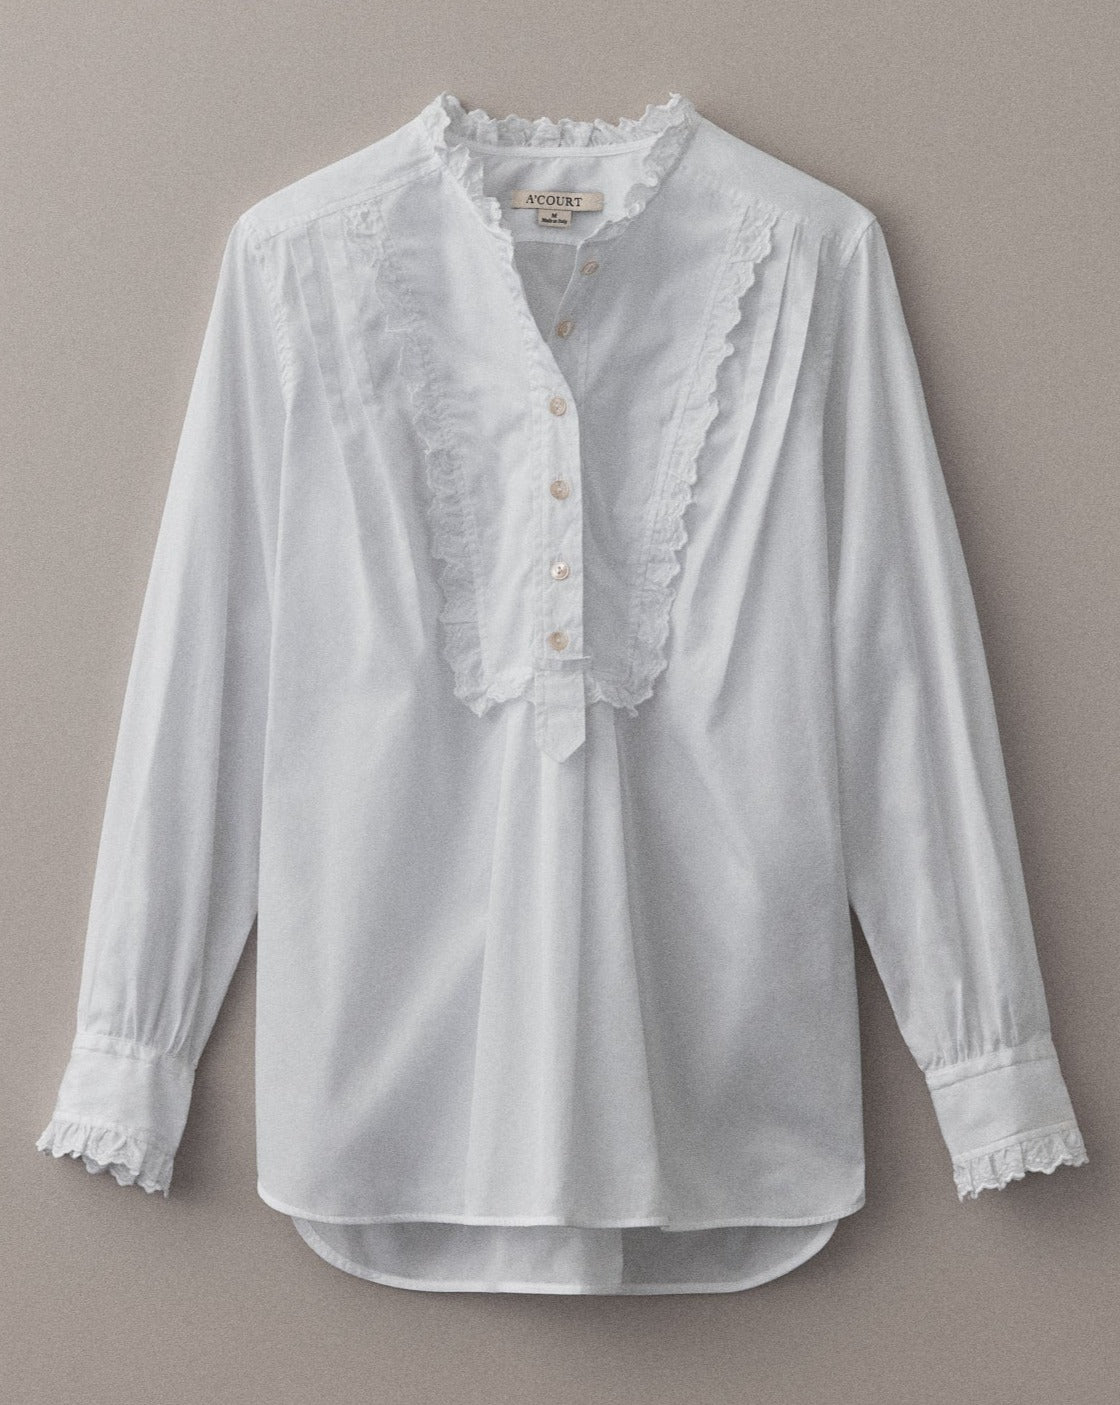 A white cotton blouse with a tuxedo-style bib, eyelet trim and half button closure lies flat on a light brown field.